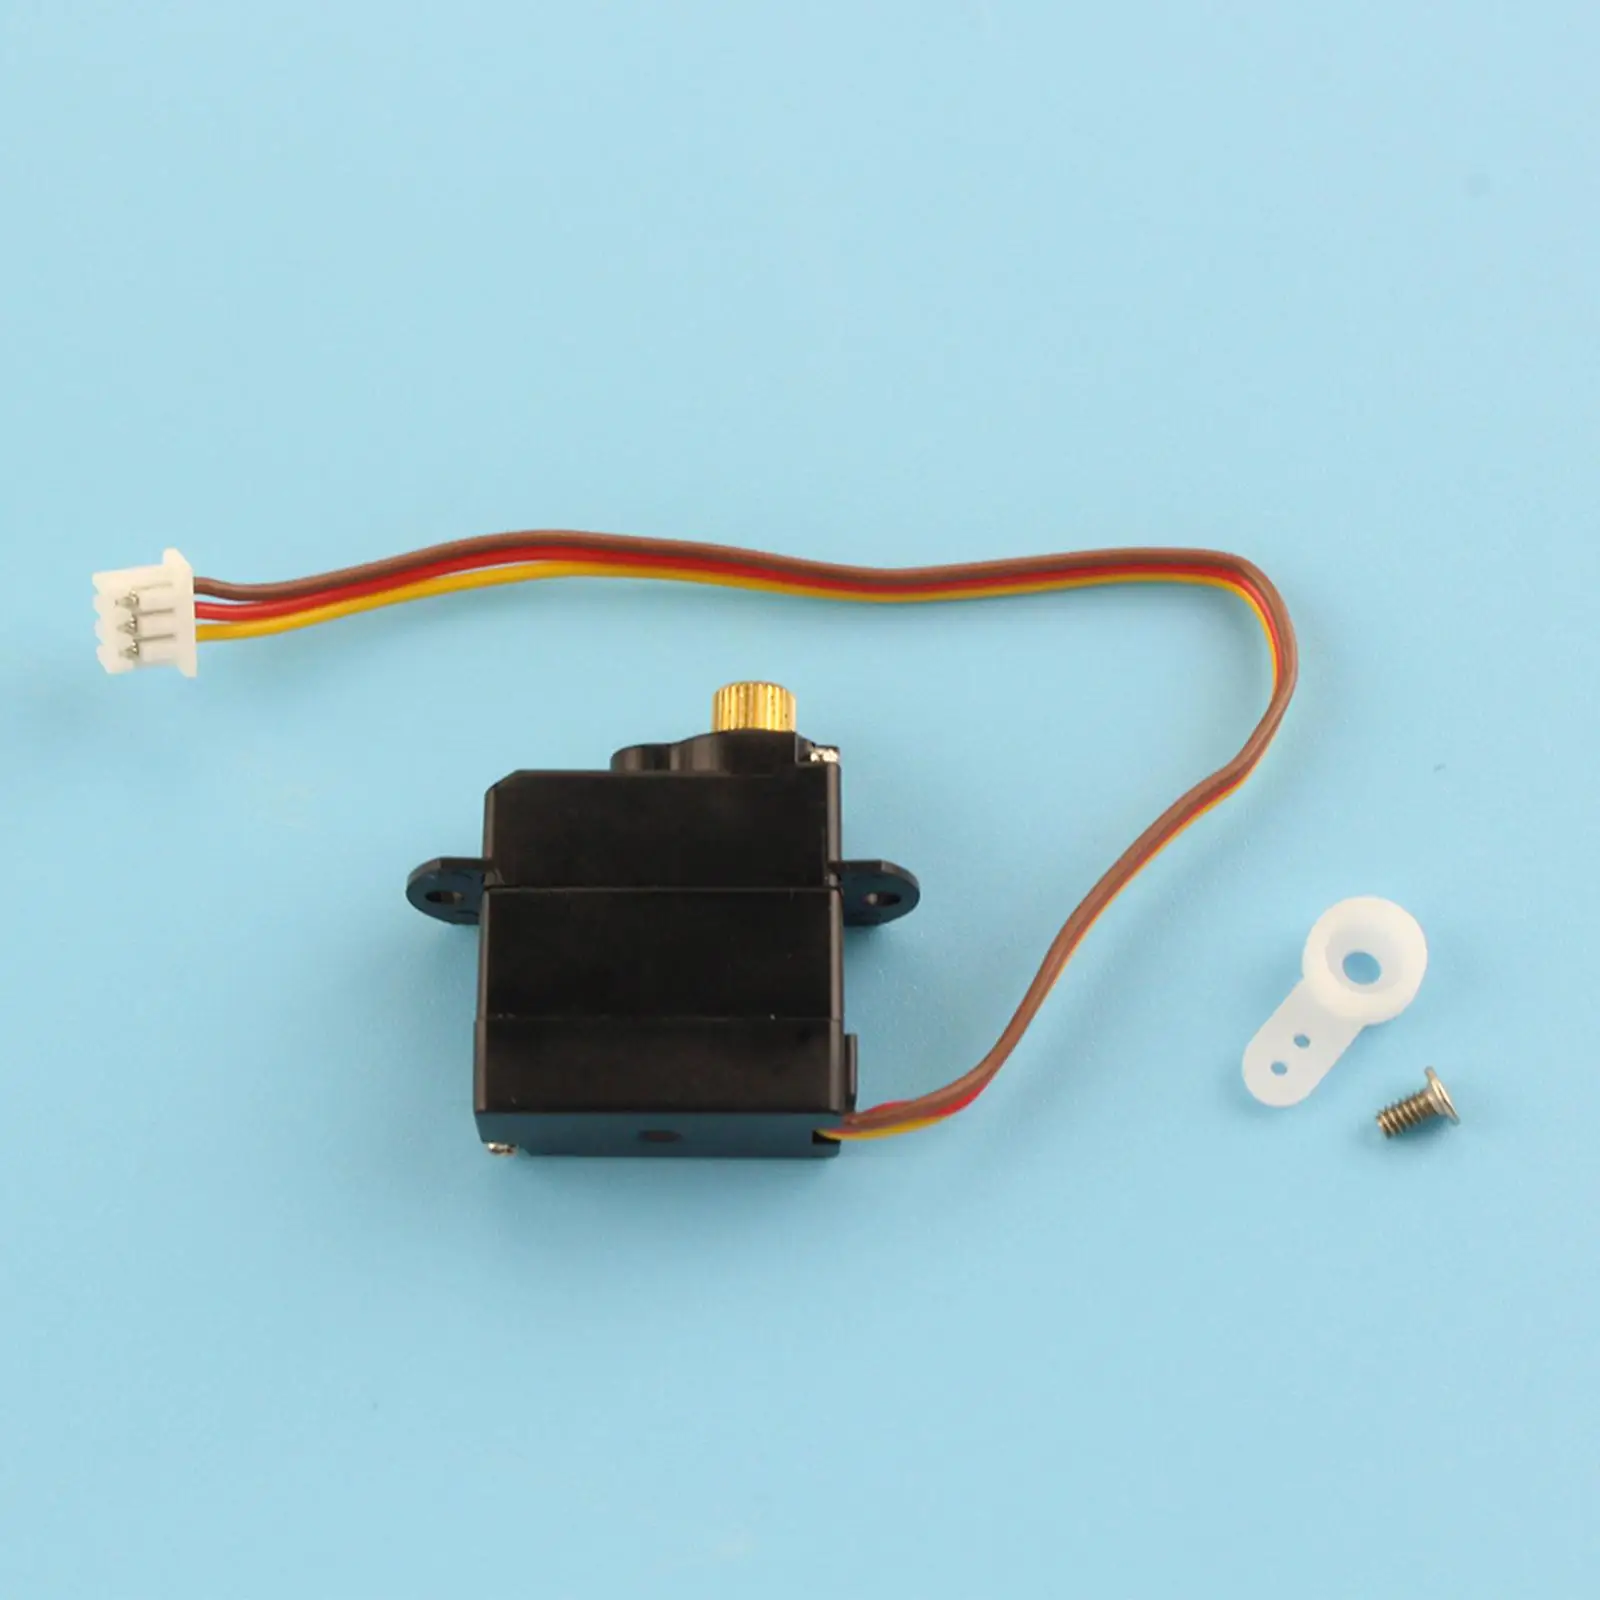 RC Aircraft Servo Spare Part Portable for Upgrade Parts Replaces DIY Accs